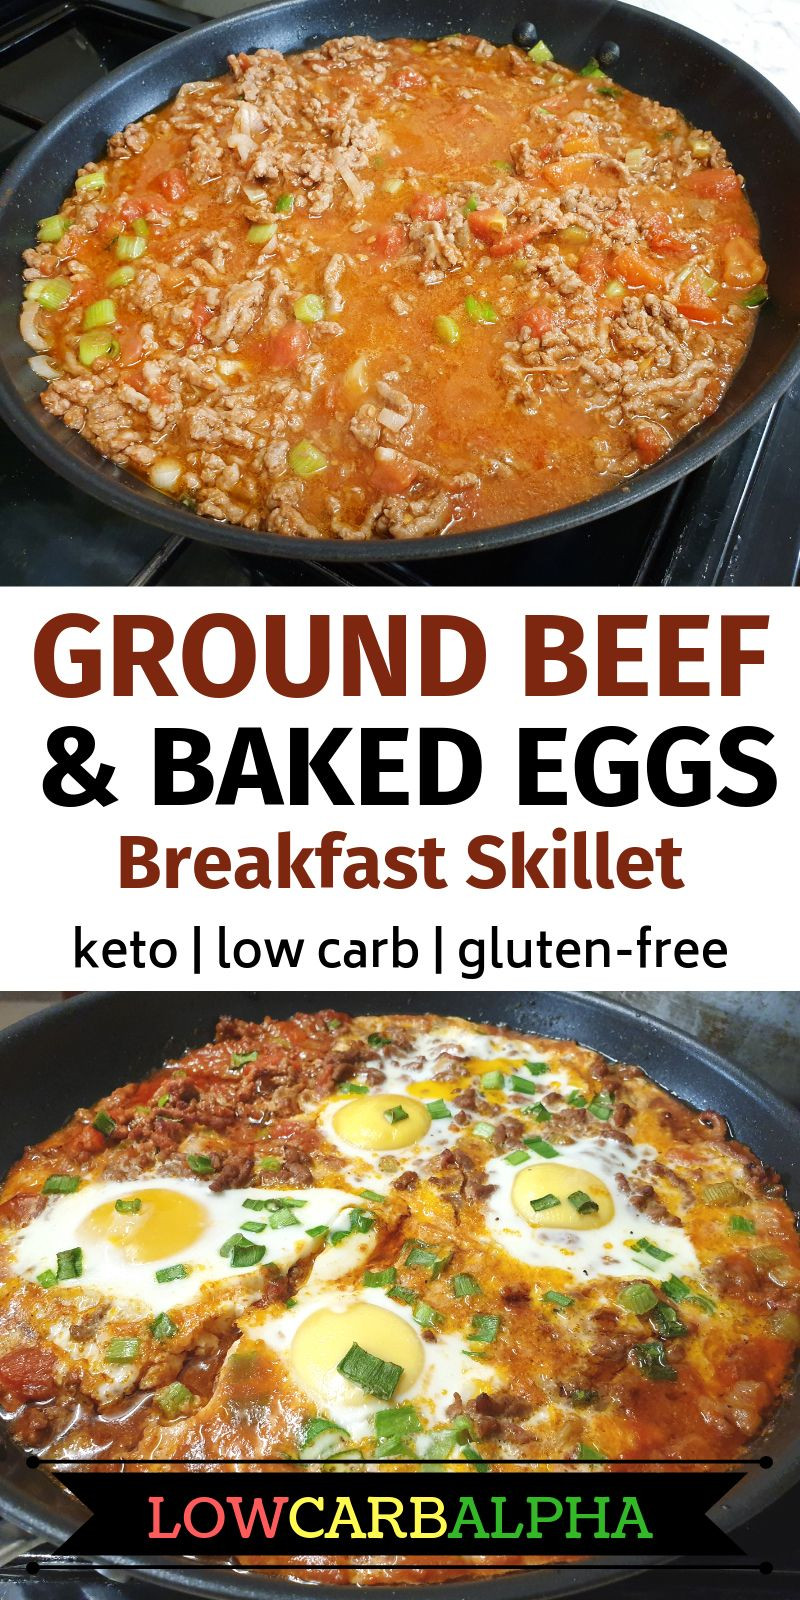 Ground Beef Keto Recipes For Dinner Dairy Free
 Keto Ground Beef Baked Eggs Breakfast Skillet